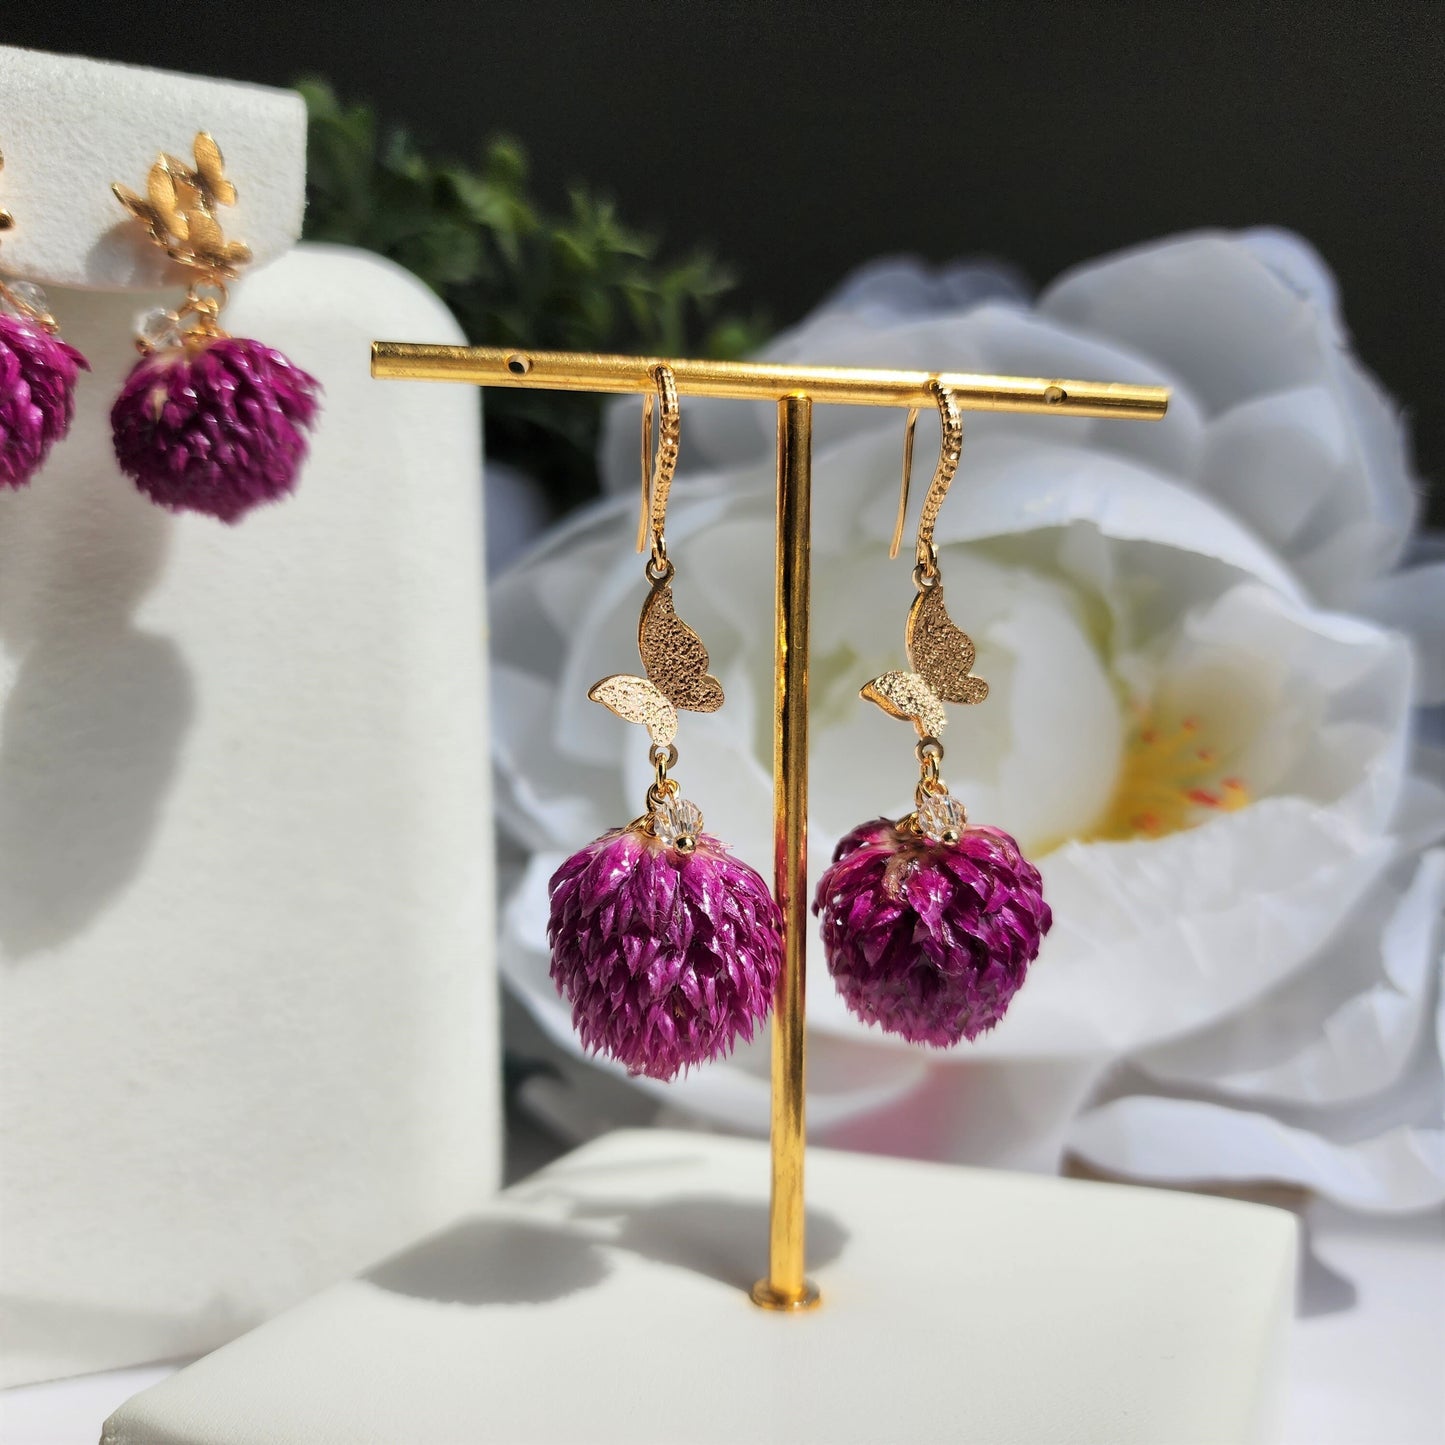 Thousand Day Red flower earrings, Botanical earrings, Real globe Amaranth flower earrings, gift for her